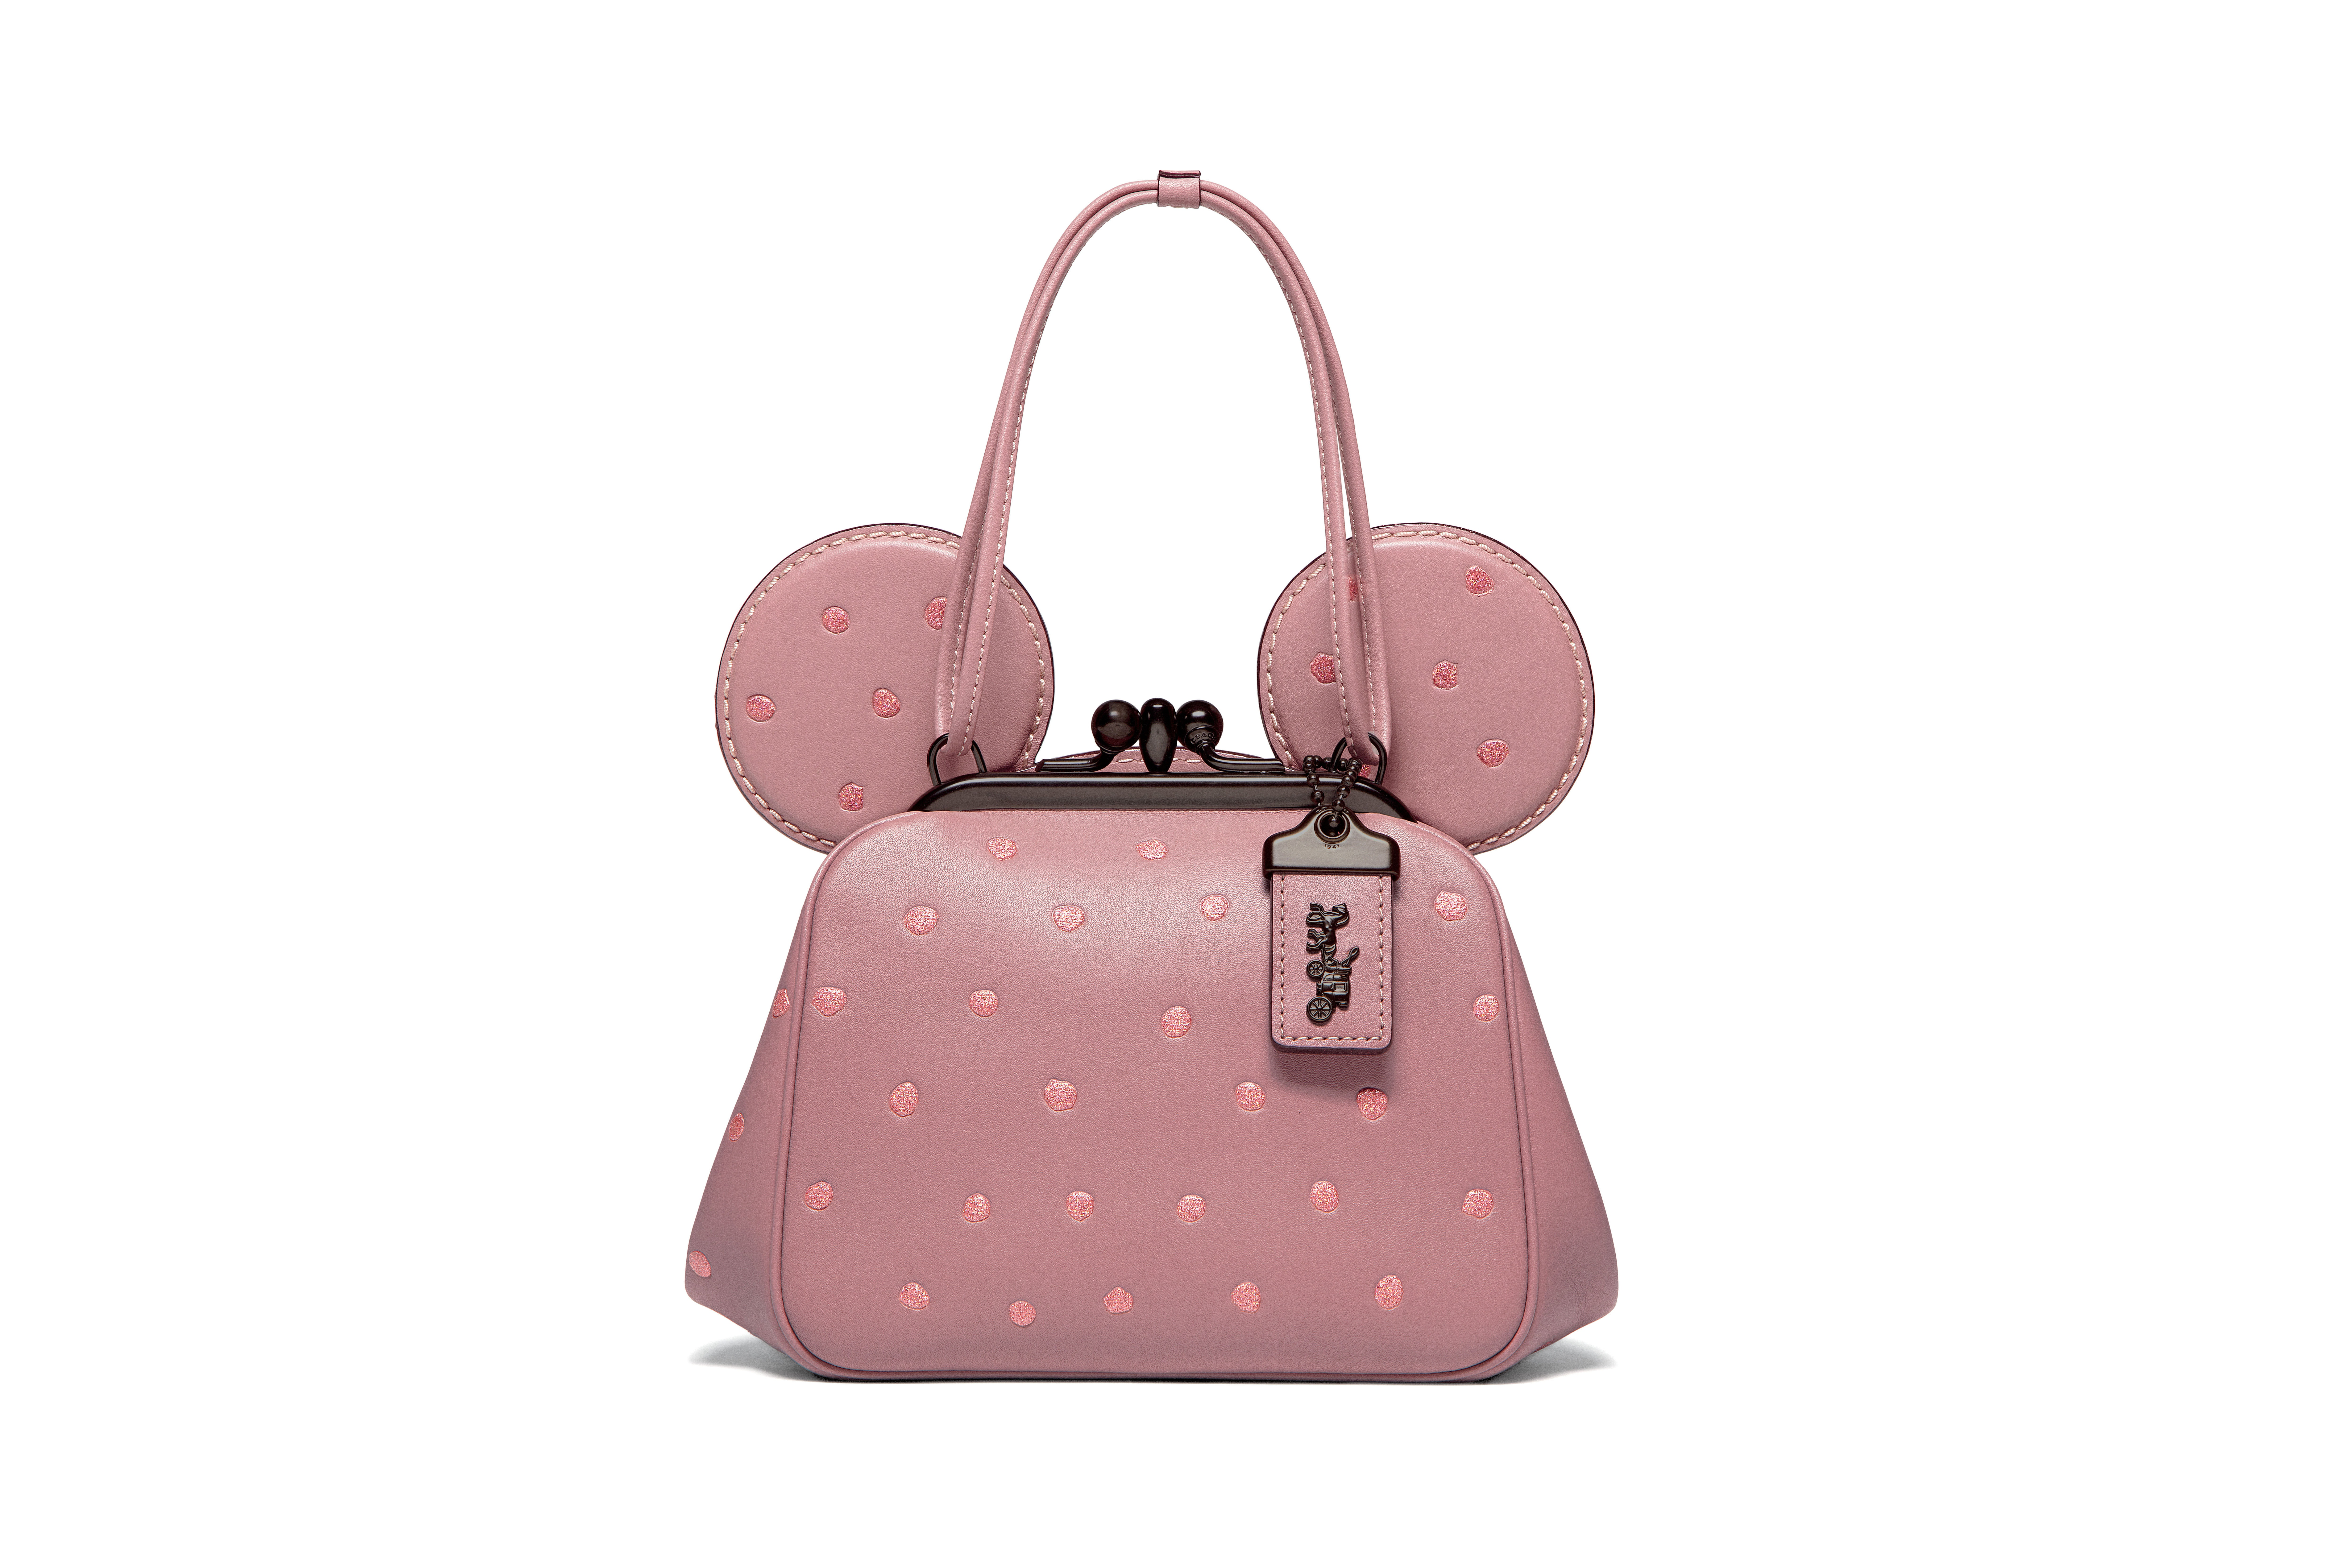 Coach Minnie Mouse Limited Edition Collection Handbags Accessories Disney Mickey Mouse Hollywood Walk of Fame